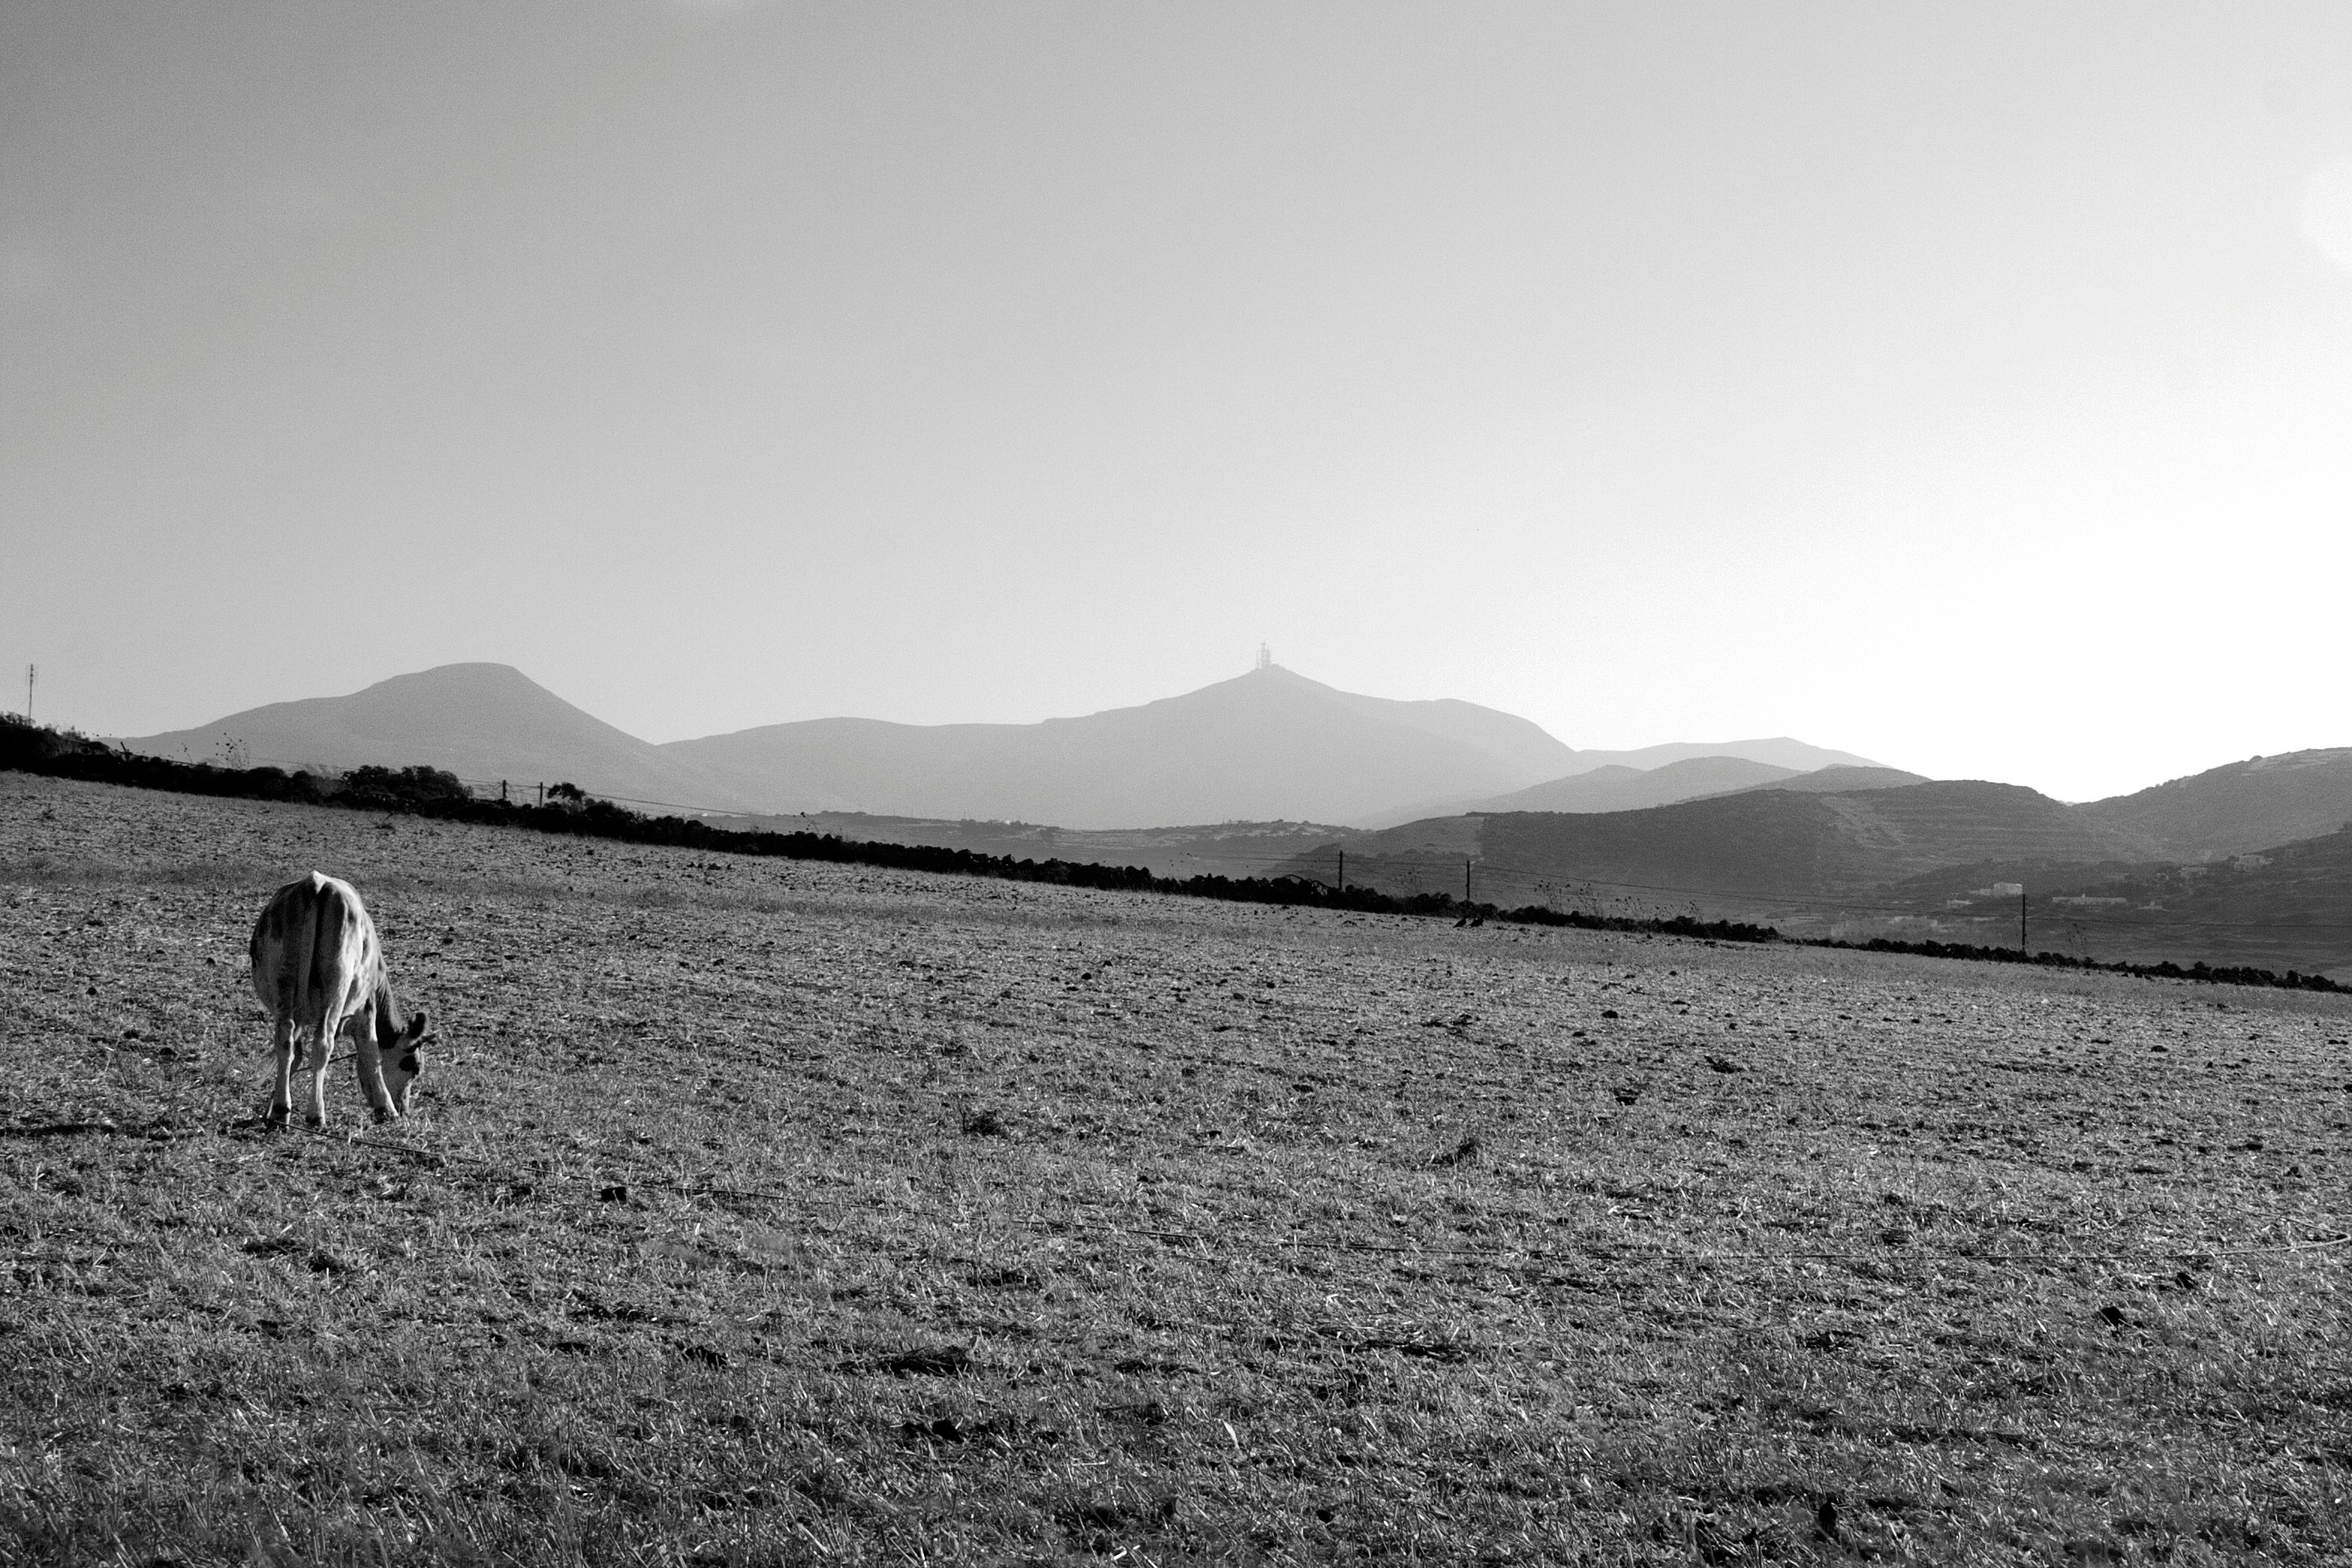 silhouette of person walking on grass field near mountains during daytime